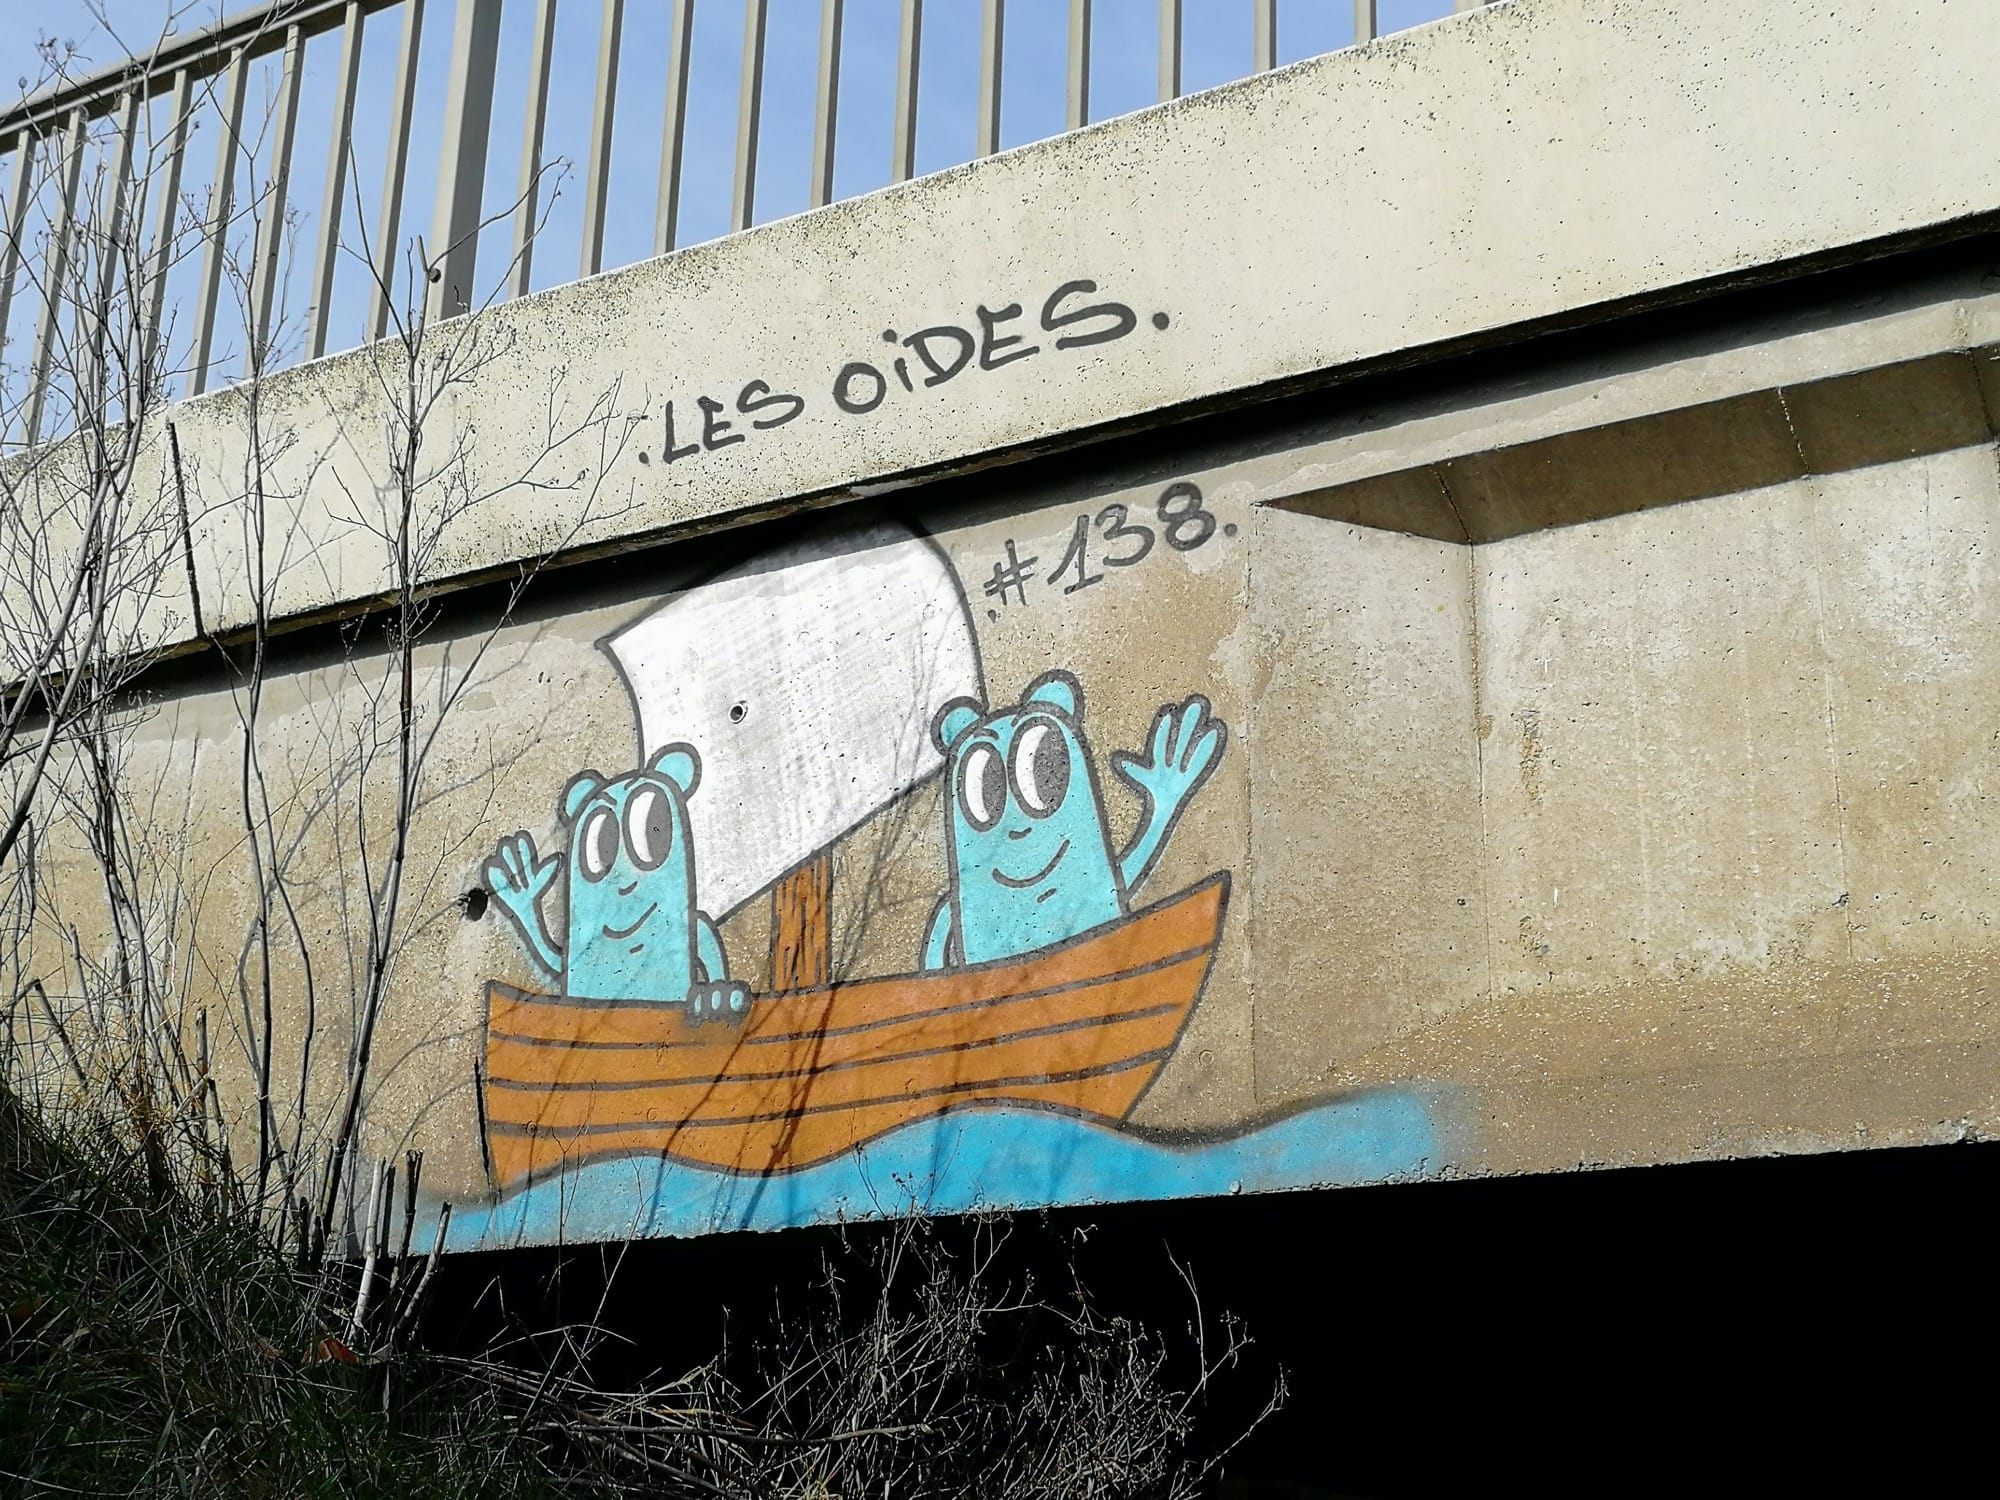 Graffiti 1320 Les oides #138 by the artist Les Oides captured by Rabot in Saint-Nazaire France